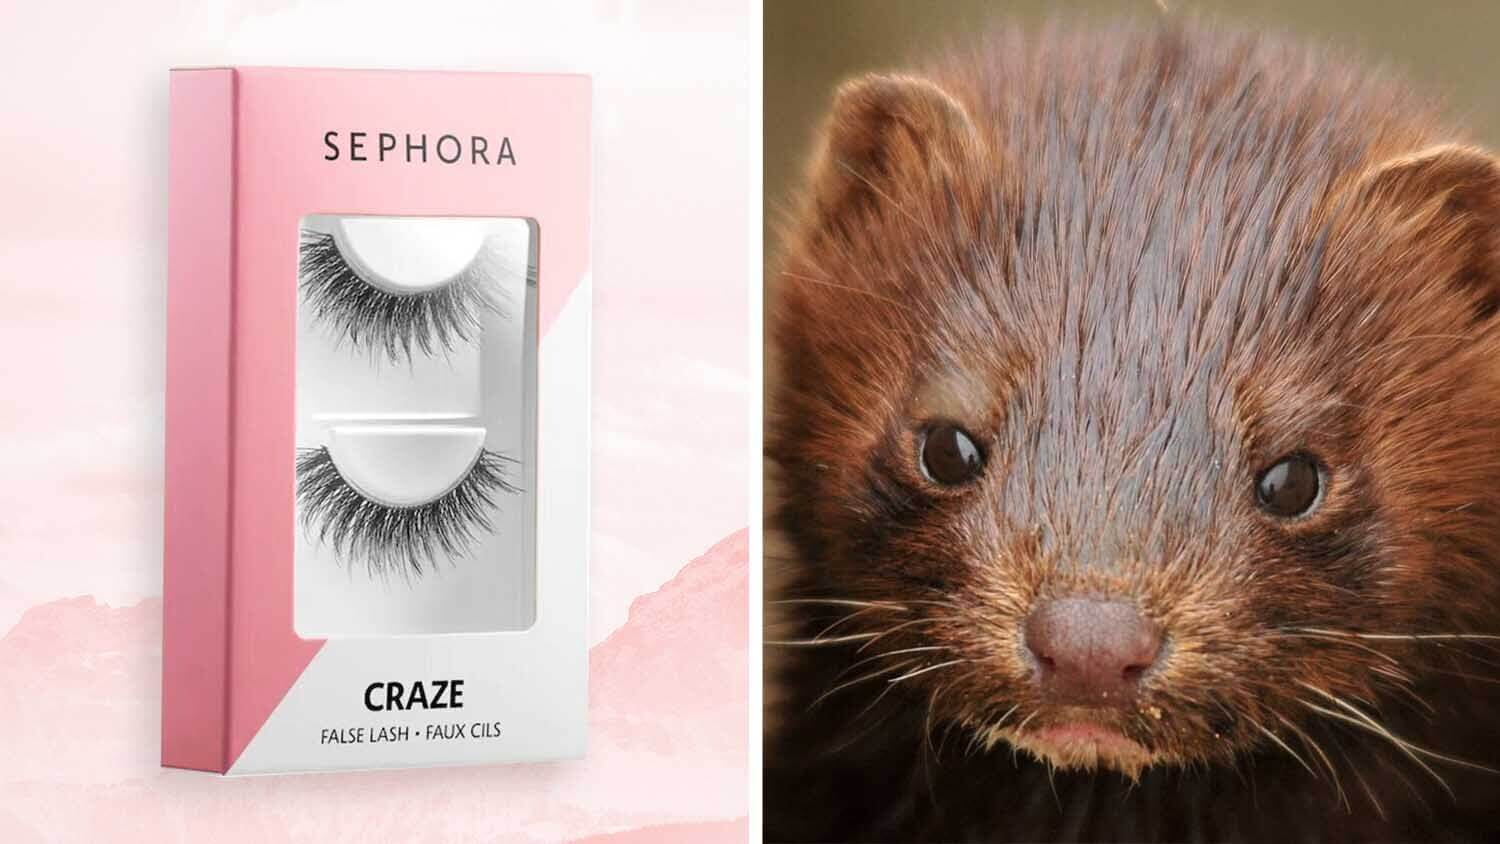 Sephora Just Banned All Mink Fur Lashes